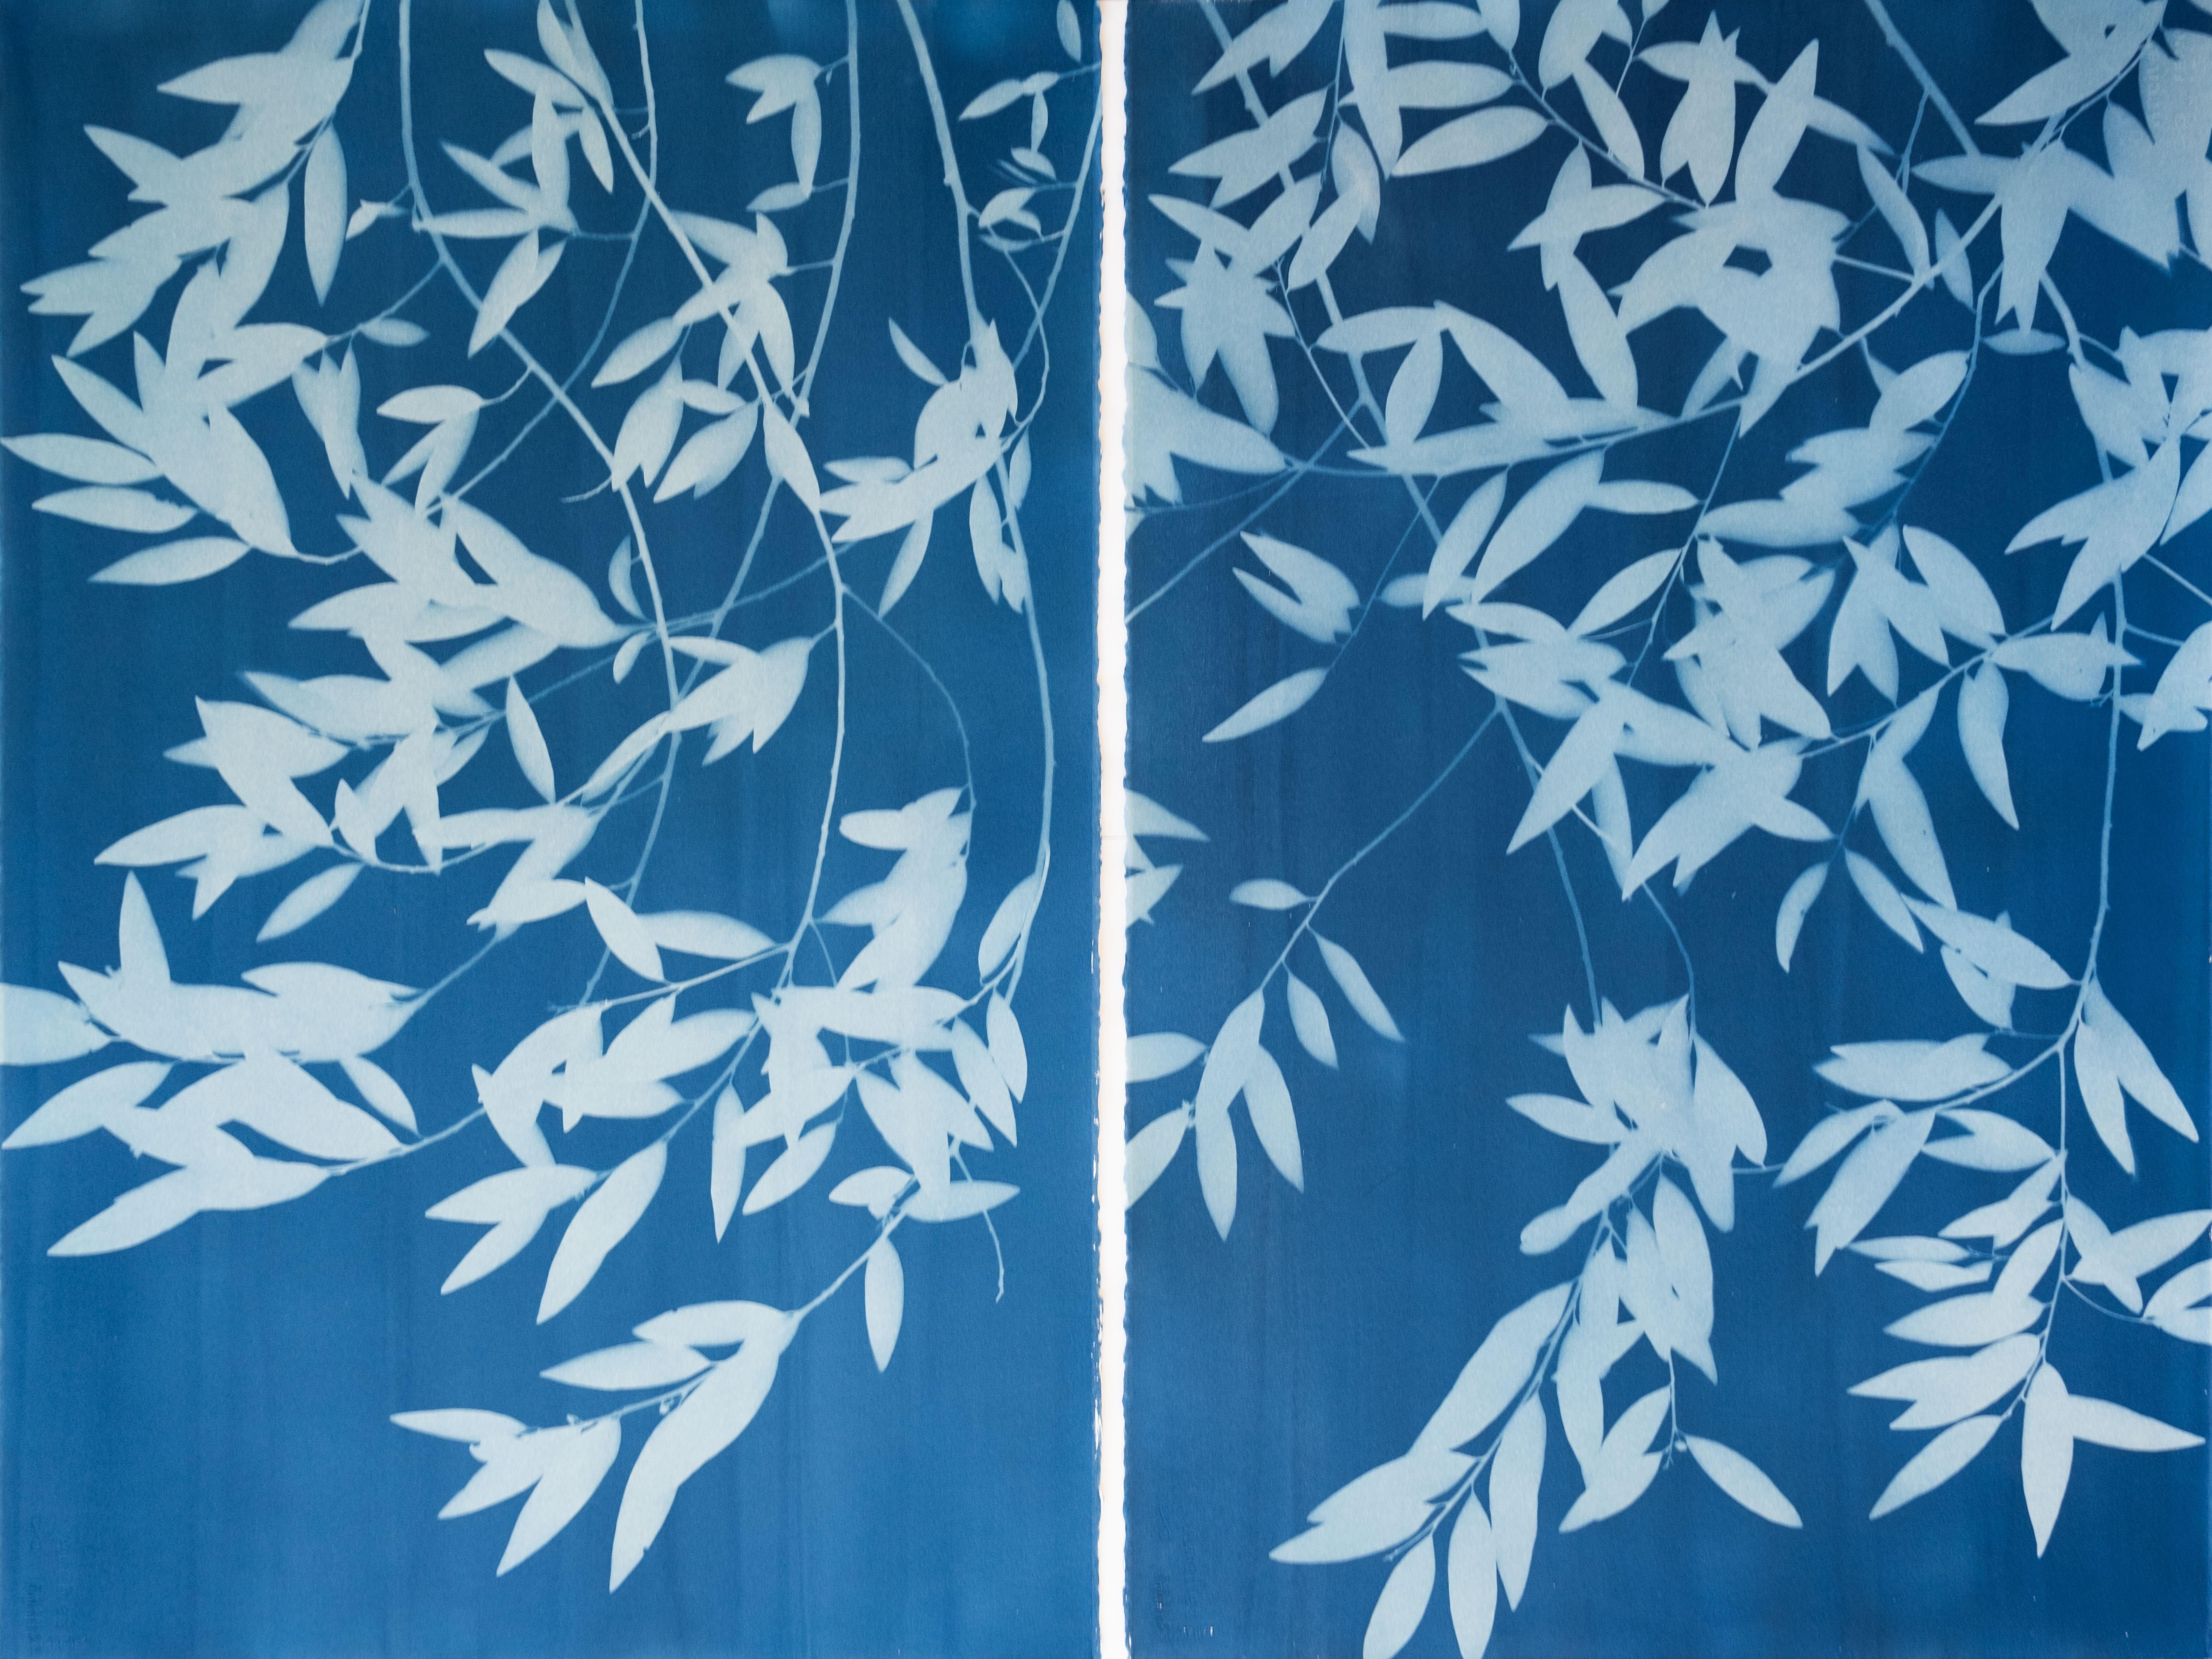 Night Laurel Diptych (Hand-printed cyanotype, 40 x 52 inches combined)